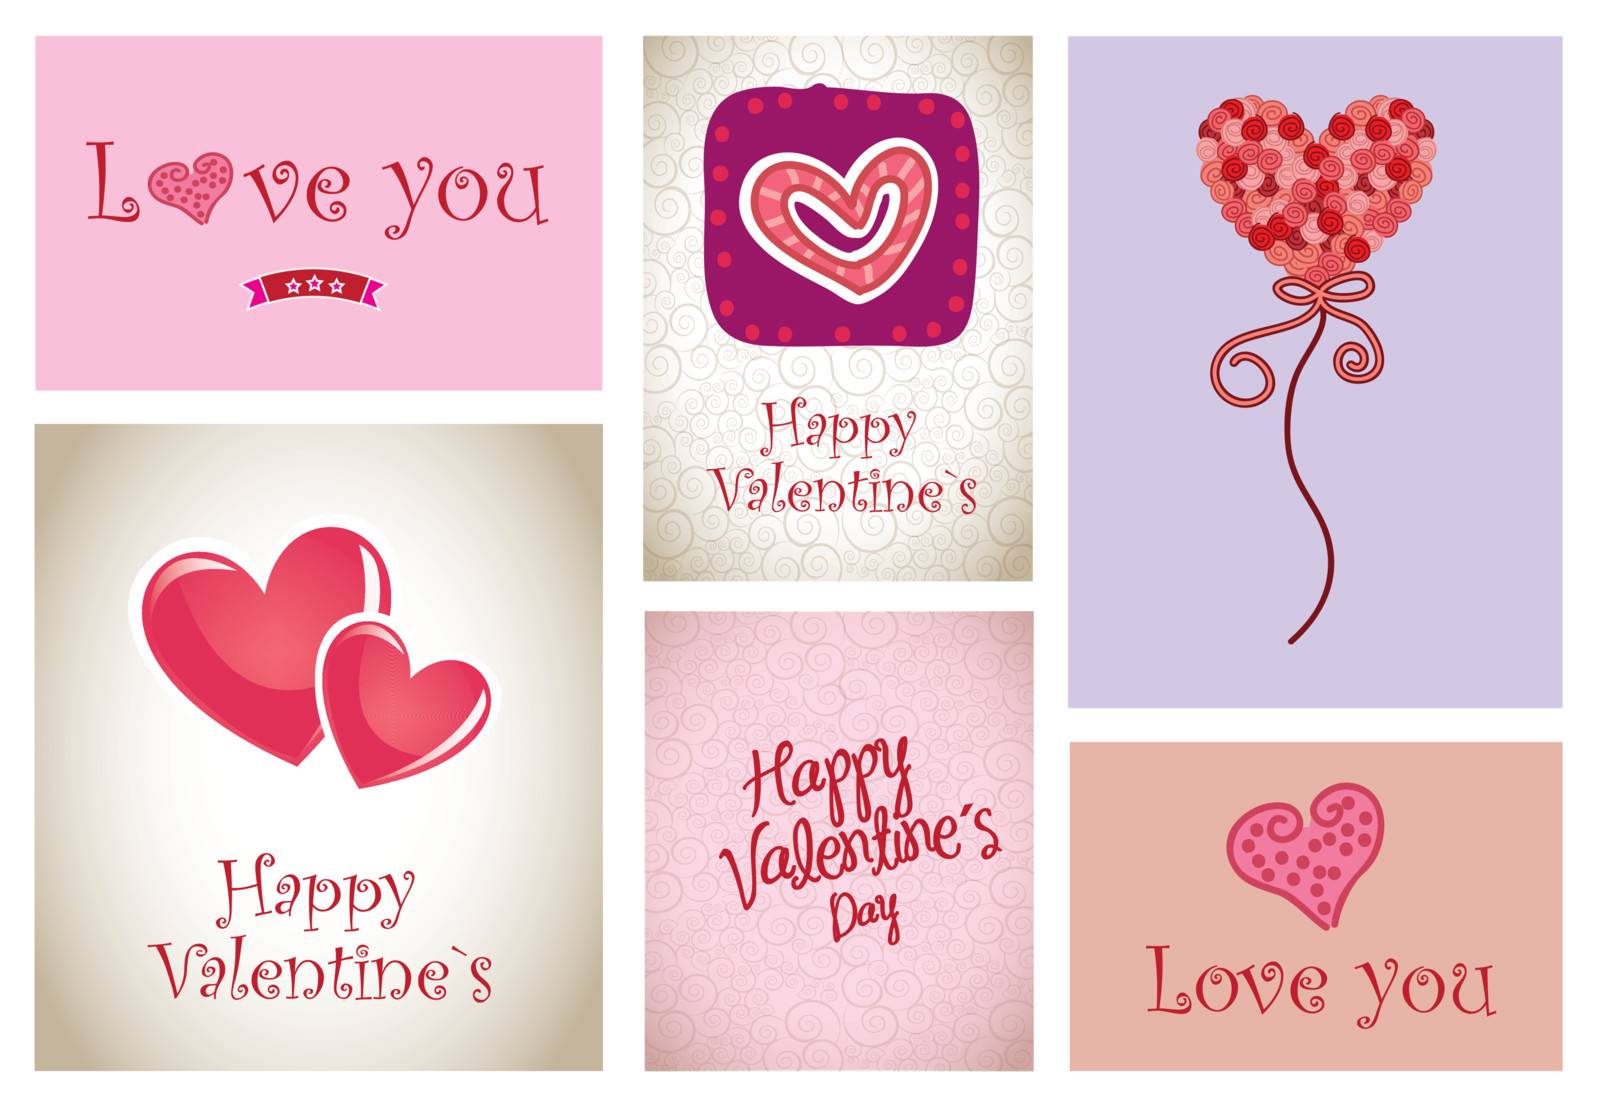 love icons and cards vector illustration valentines day